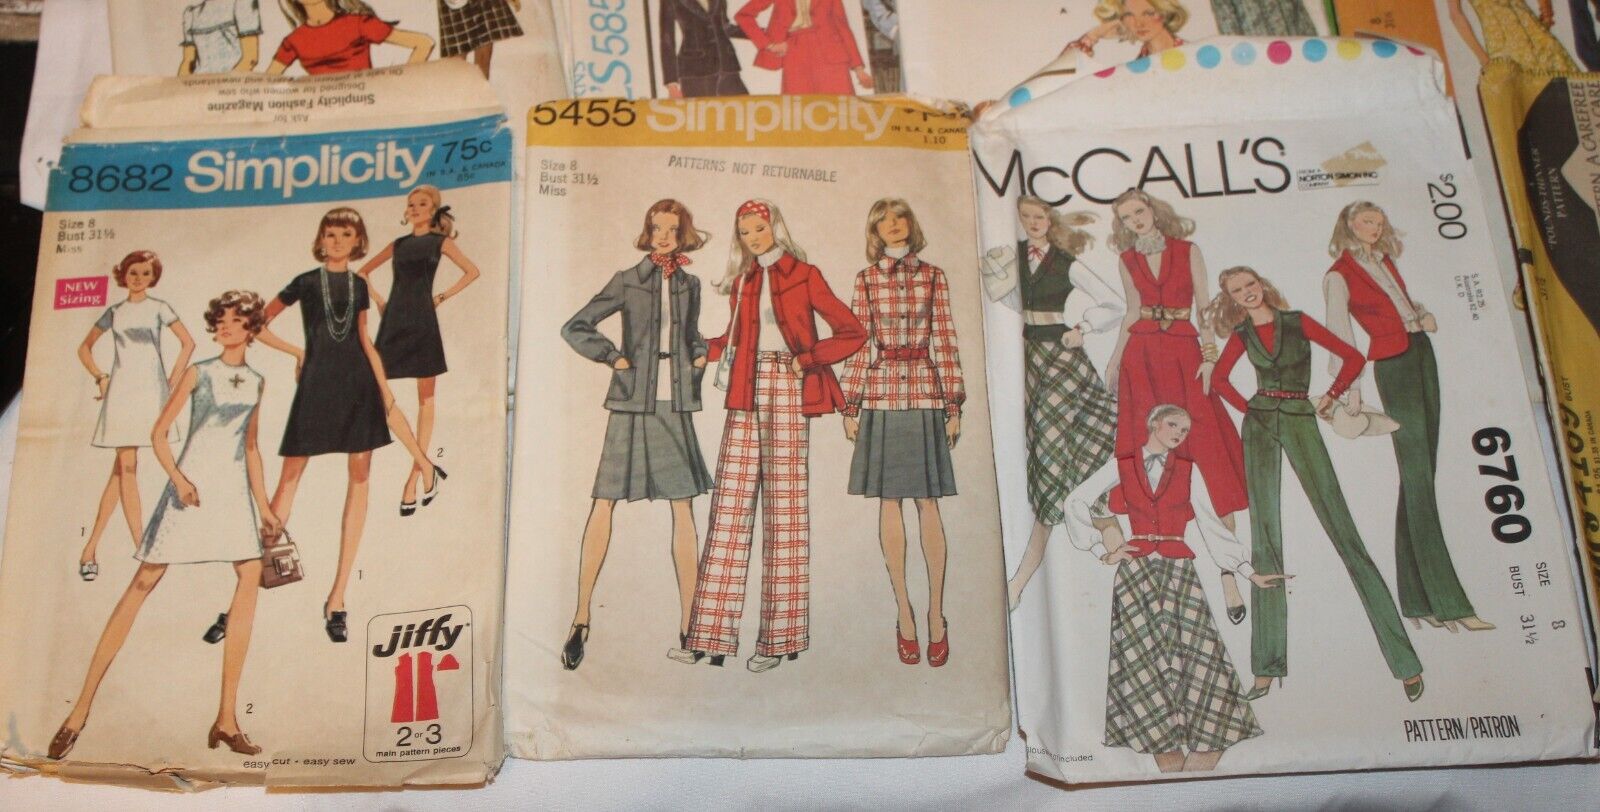 20 Vtg 1960's/70s Sewing Pattern Lot Women's Clothing SZ 8 McCalls Simplicity